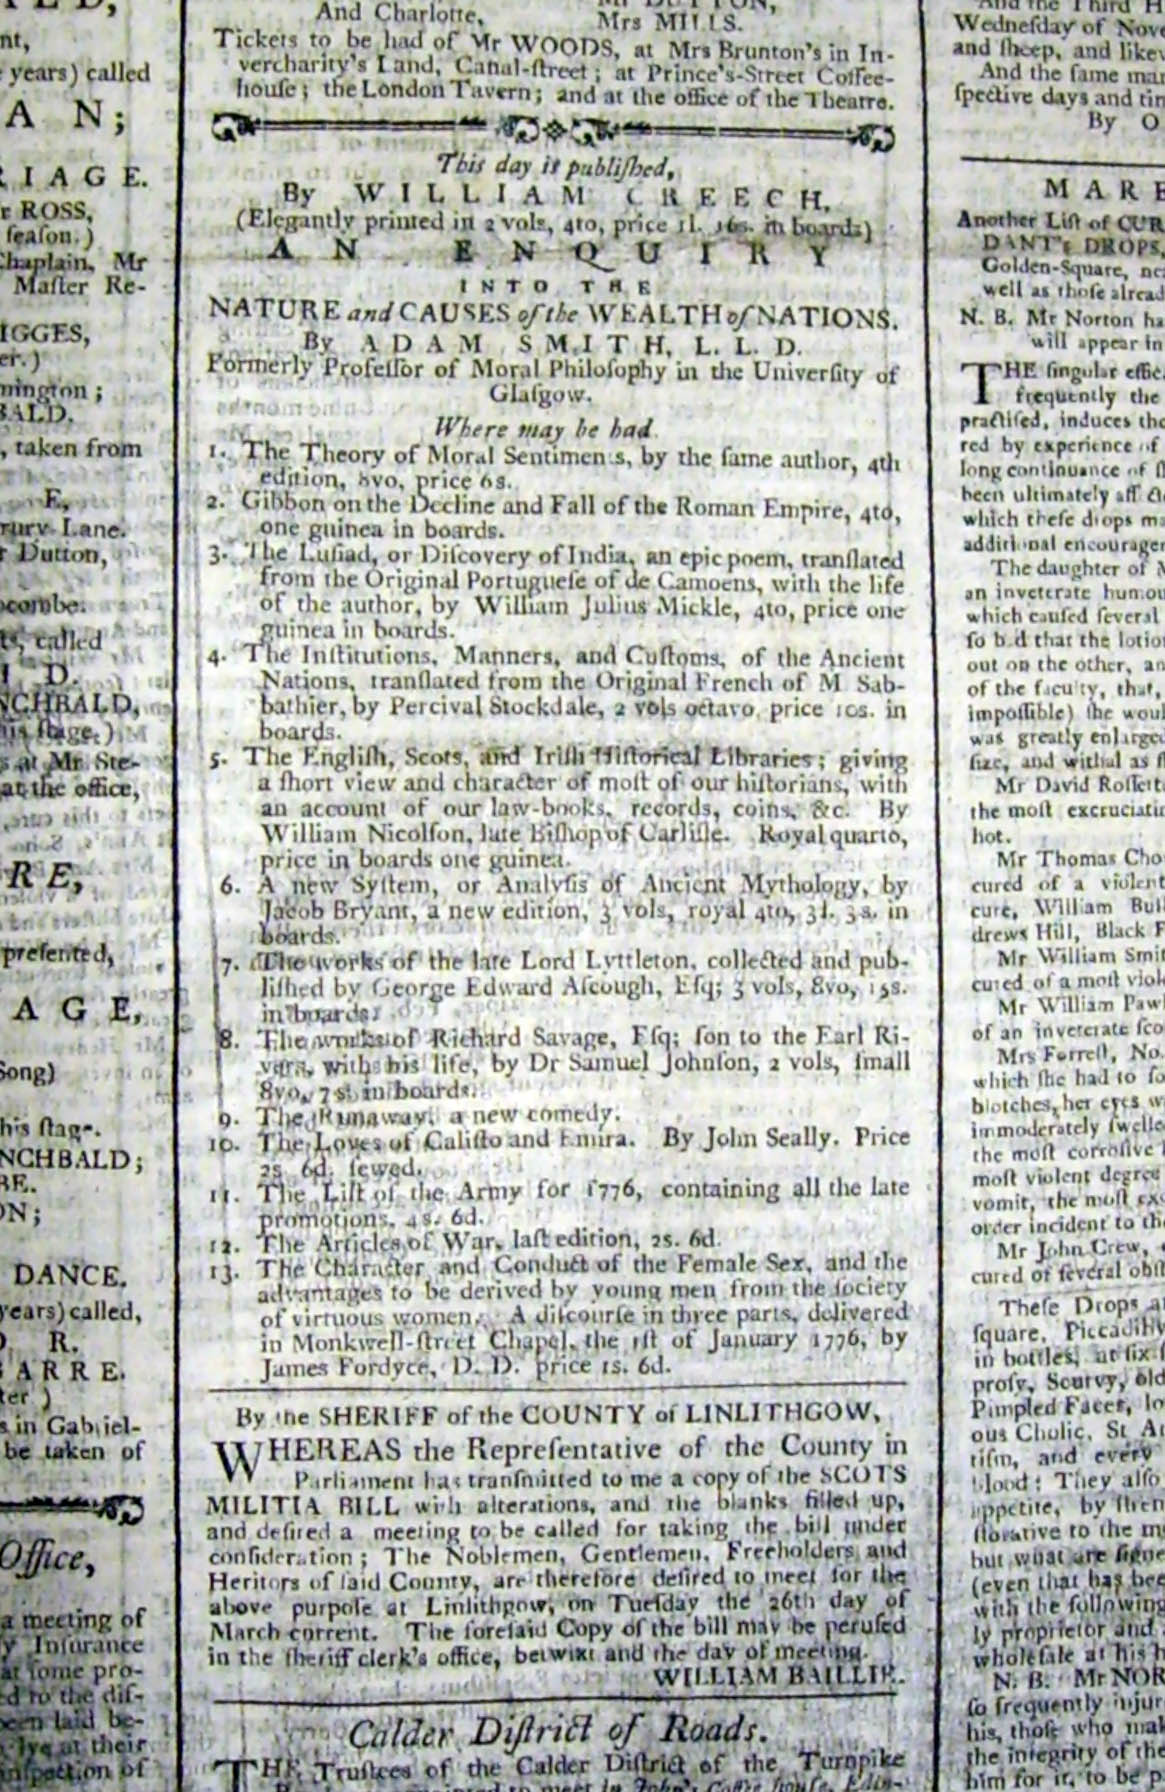 Creech’s advertisement in the Edinburgh Evening Courant, 20 March 1776, for the first edition of Smith’s Wealth of Nations. Image courtesy of the National Library of Scotland, with special thanks to Graham Hogg, Curator, Rare Books, Maps & Music Collections.